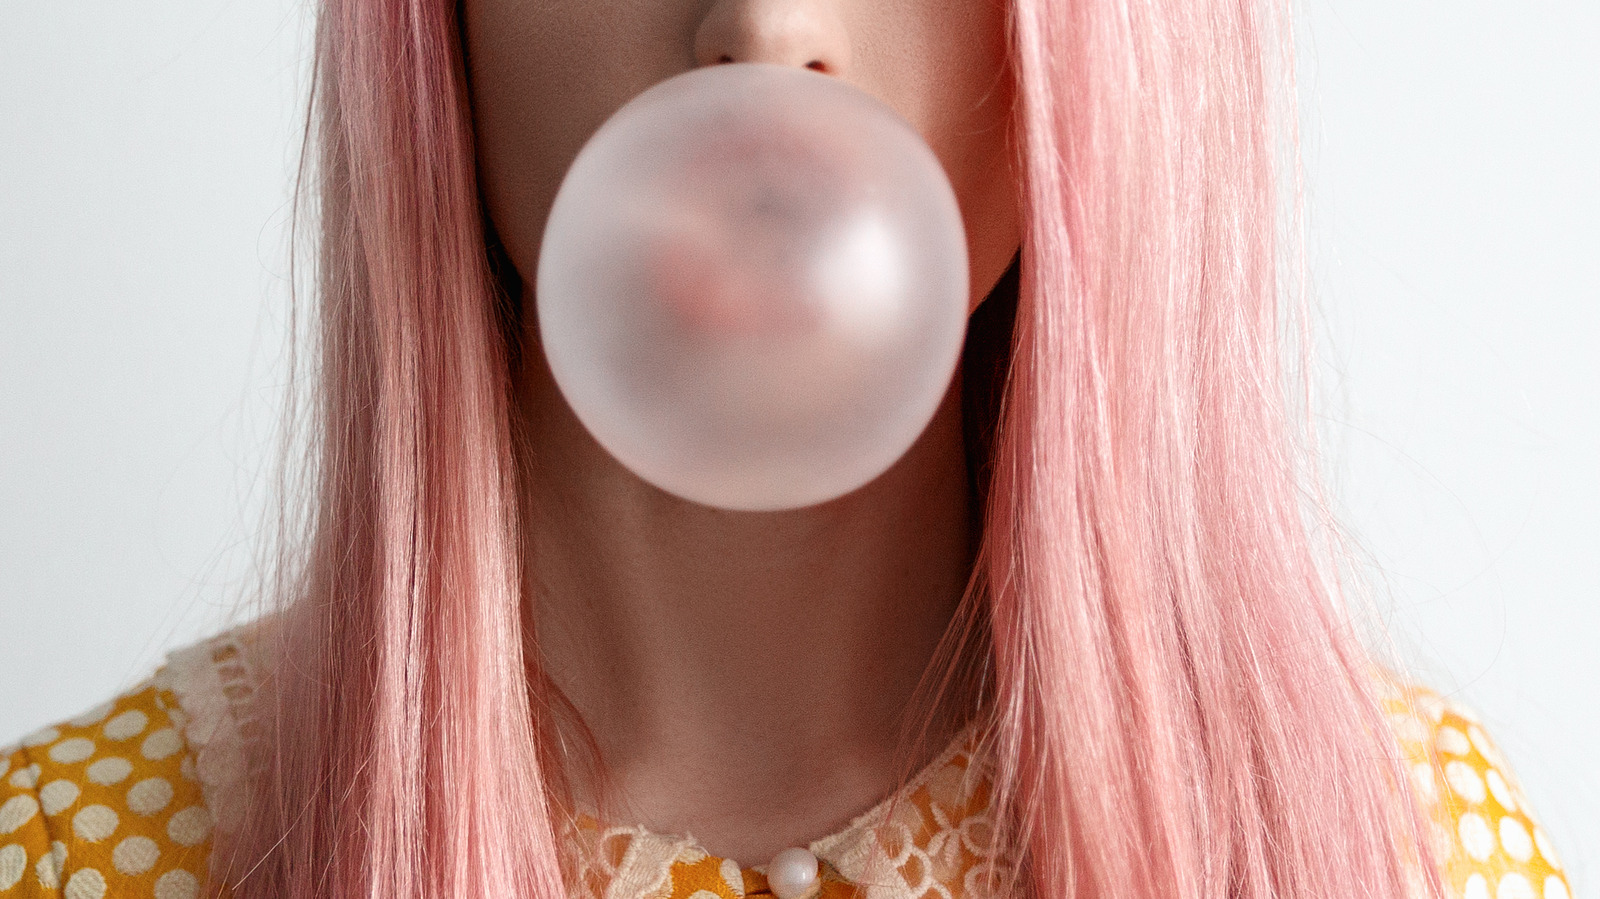 Here's Where Bubblegum Flavor Really Comes From